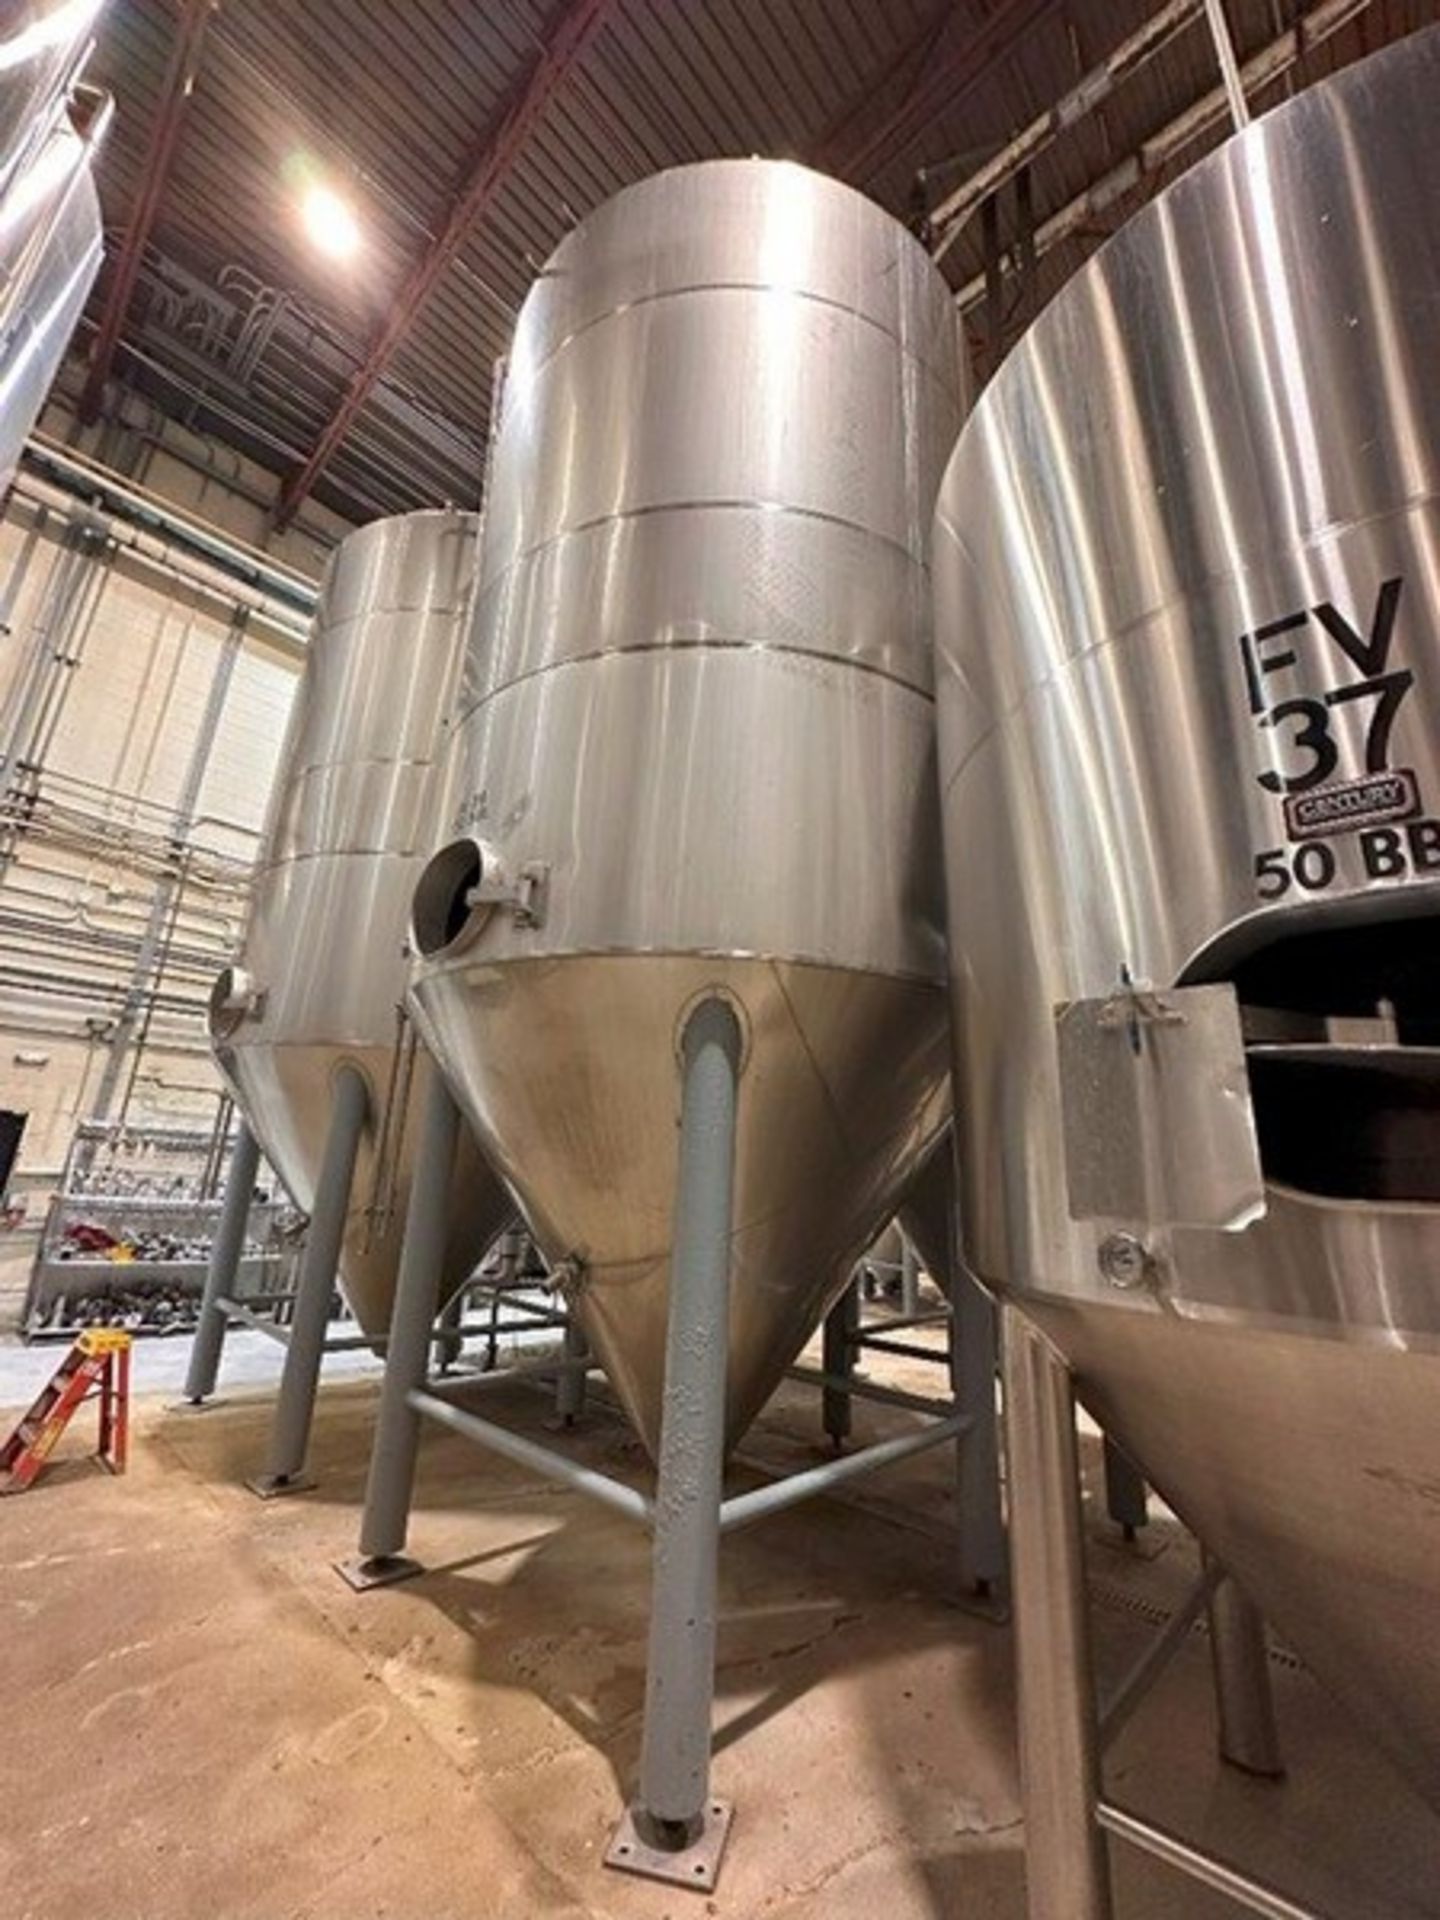 150 BBL (4650 Gallon) Vertical Cone Bottom 304 Stainless Steel Jacketed Vessel. Manufactured by Sant - Image 3 of 8